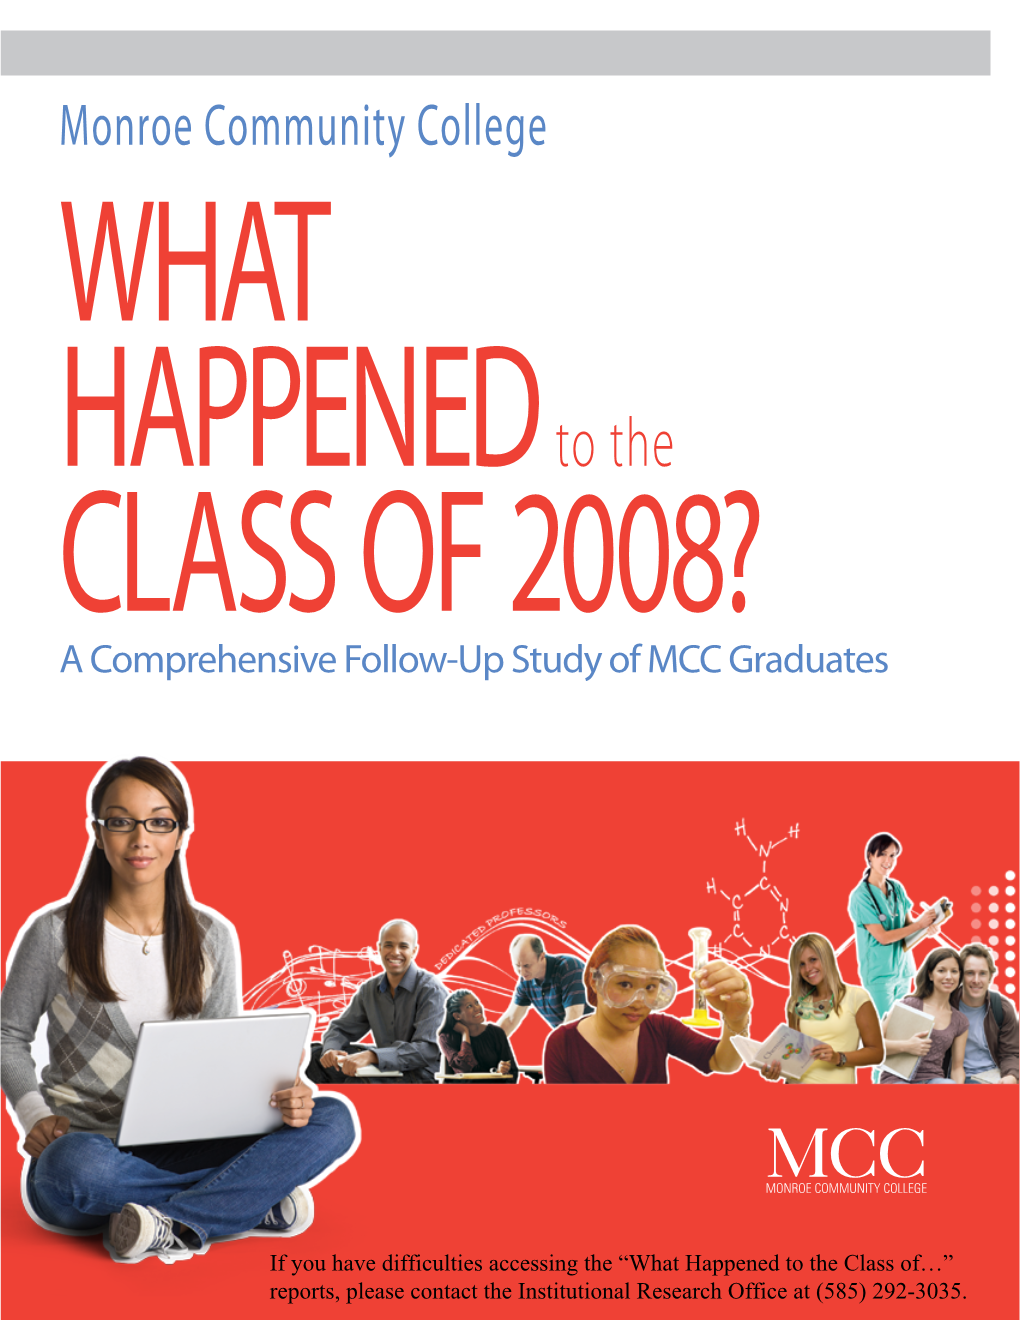 WHAT HAPPENED to the CLASS of 2008? a Comprehensive Follow-Up Study of MCC Graduates